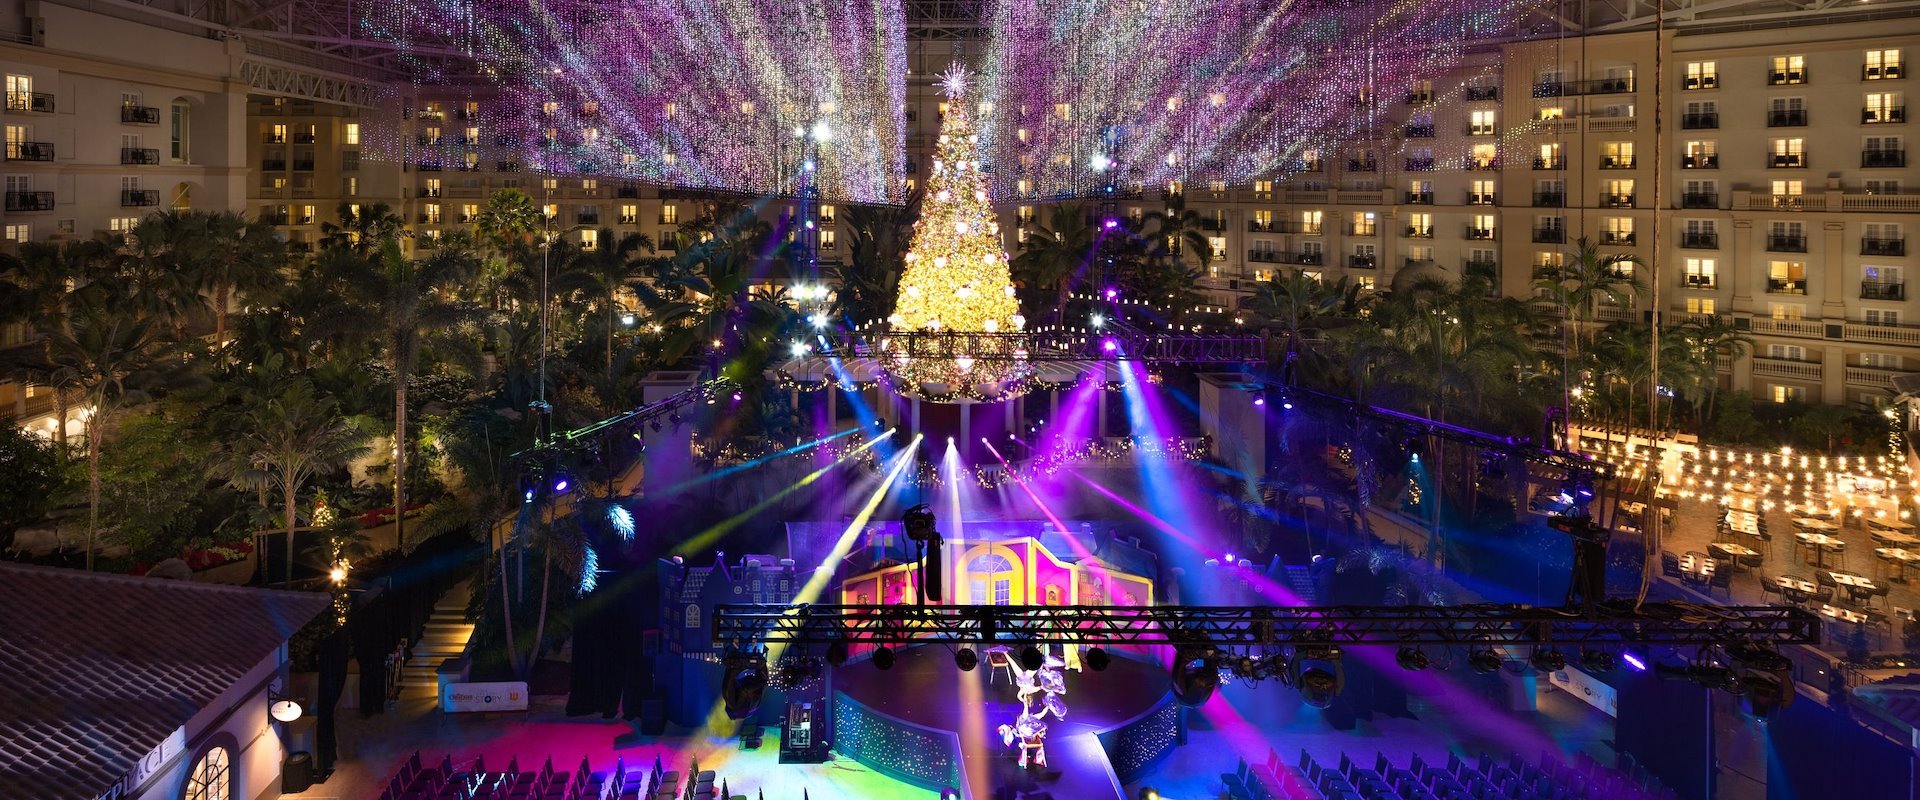 Christmas Events in Kissimmee, FL Christmas at Gaylord Palms